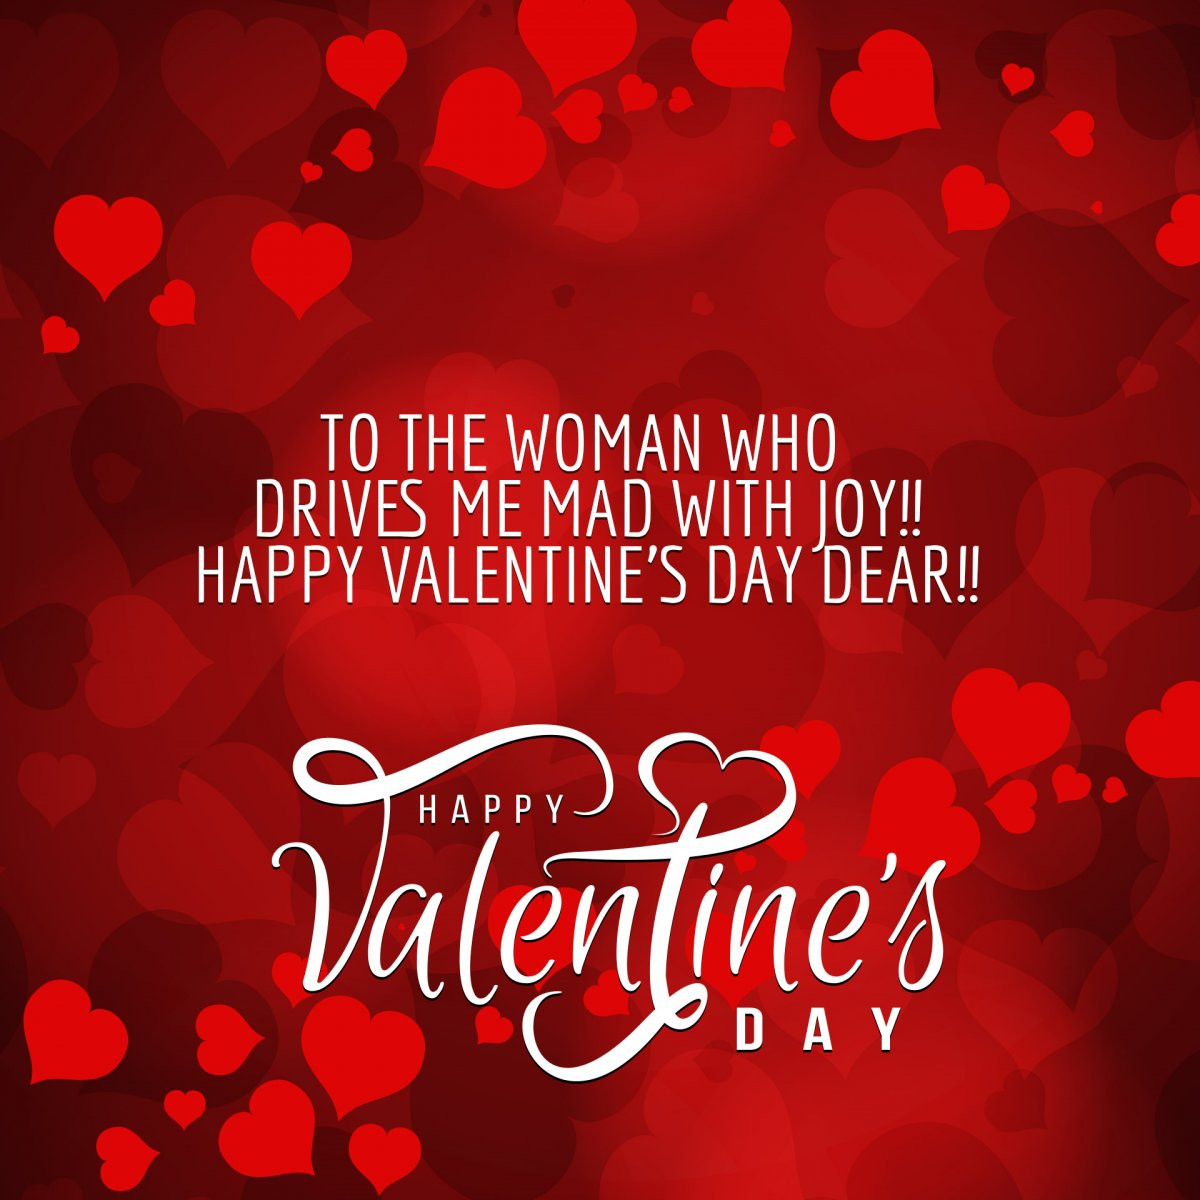 Quotes For Valentines Day
 Cute Happy Valentine’s Day 2019 Wishes Messages and Love